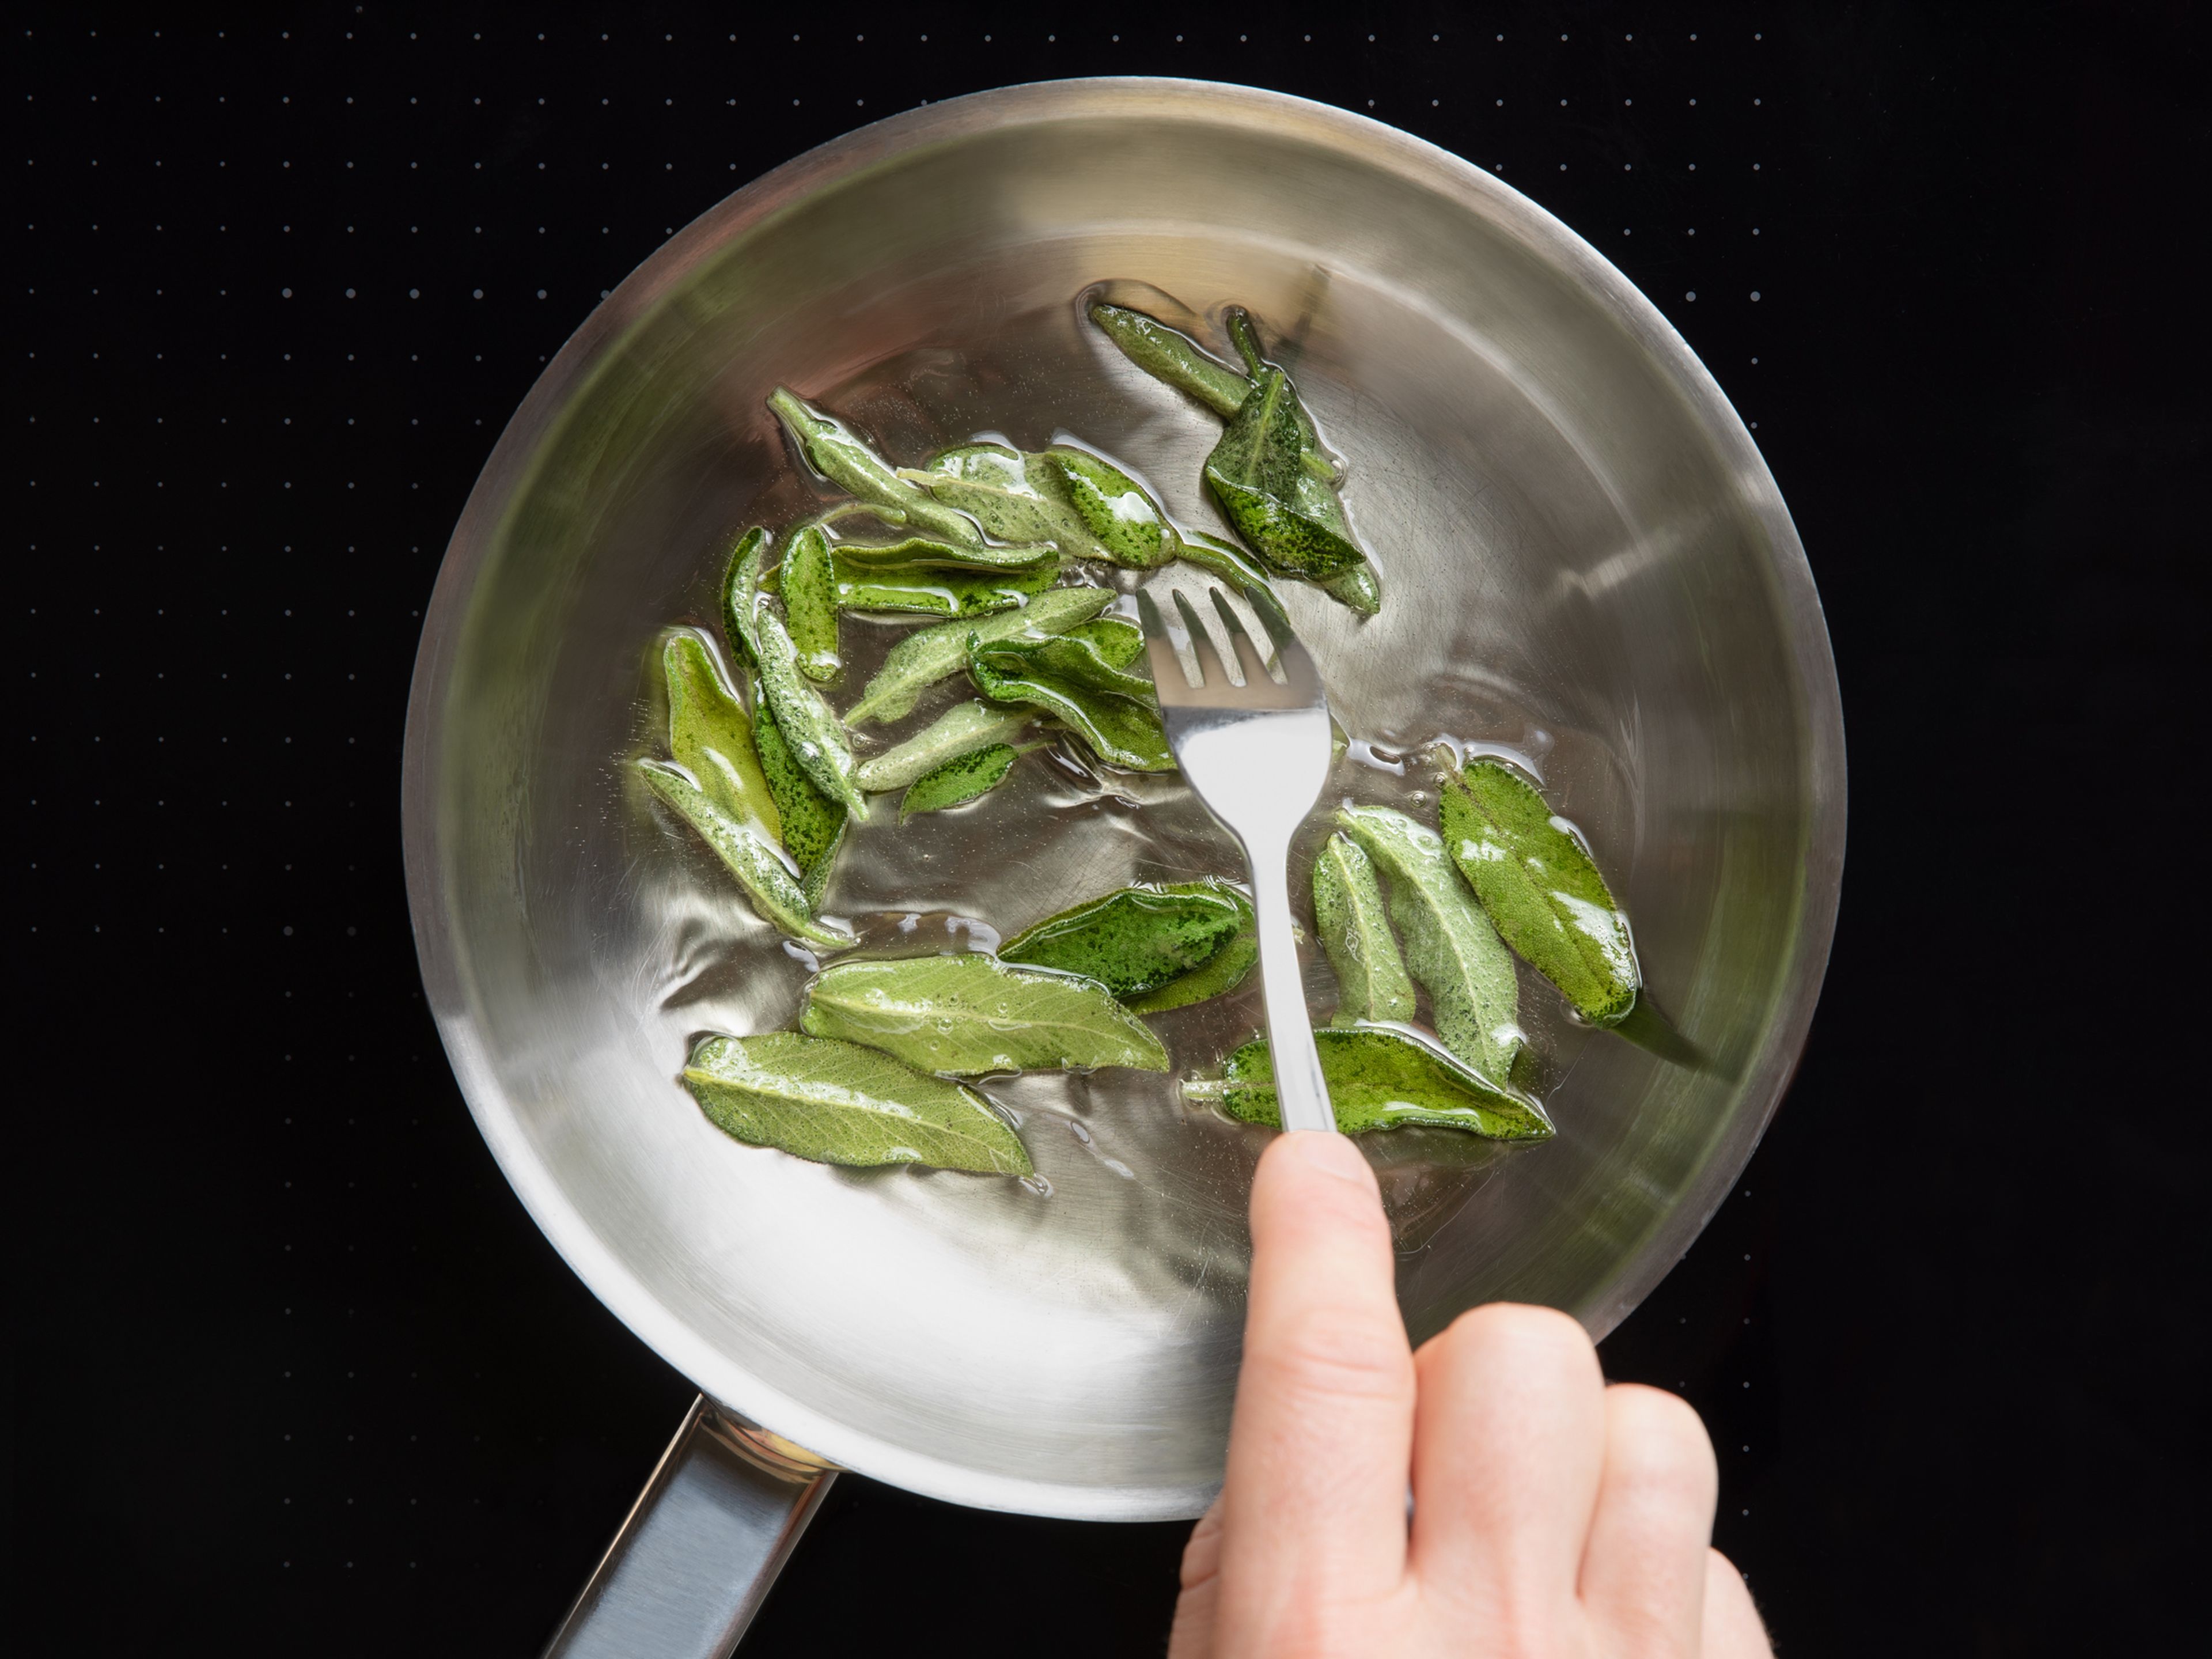 In the meantime, heat vegetable oil in a frying pan and deep-fry the sage leaves for approx. 2 min. Drain on a kitchen towel. In the same pan, toast the breadcrumbs in the frying oil together with the sage strips and a little salt until golden brown and also drain.